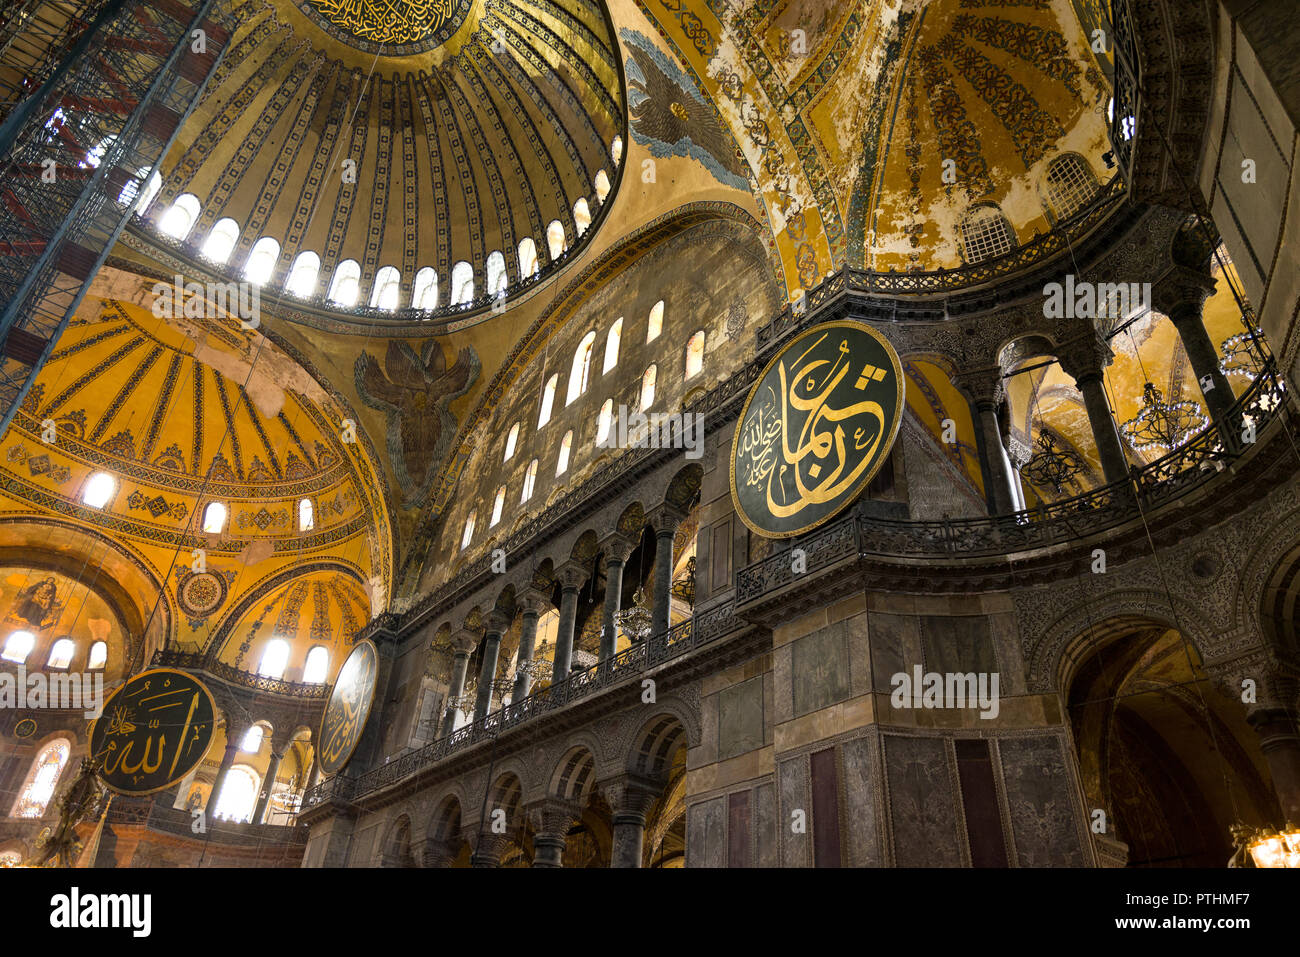 Interior nave of the Hagia Sophia museum showing main dome and calligraphic roundels on the walls, Istanbul, Turkey Stock Photo